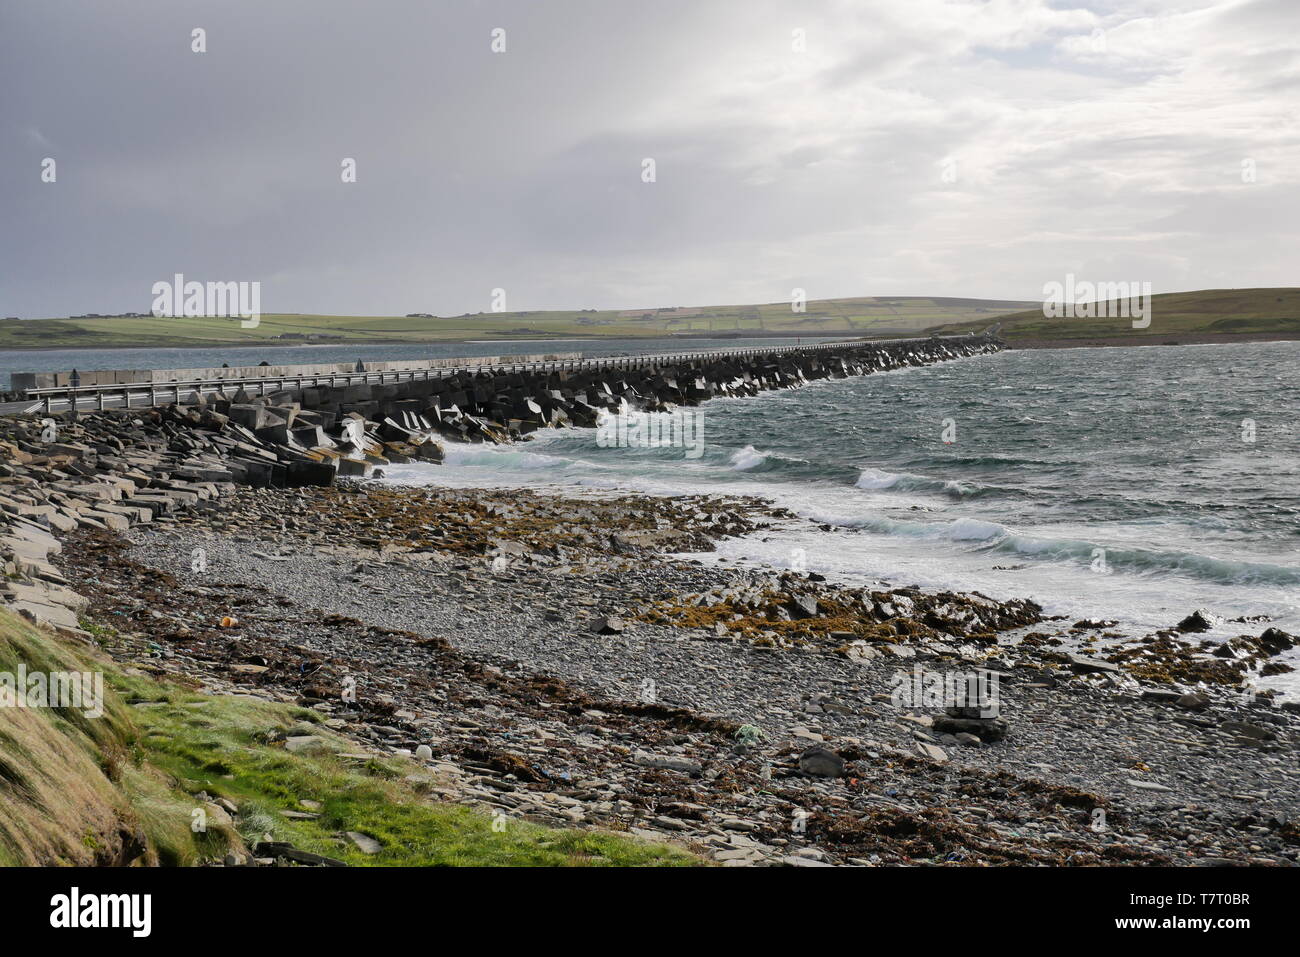 A roadway across a Churchill Barrier in the Orkney Islands in Scotland, UK Stock Photo